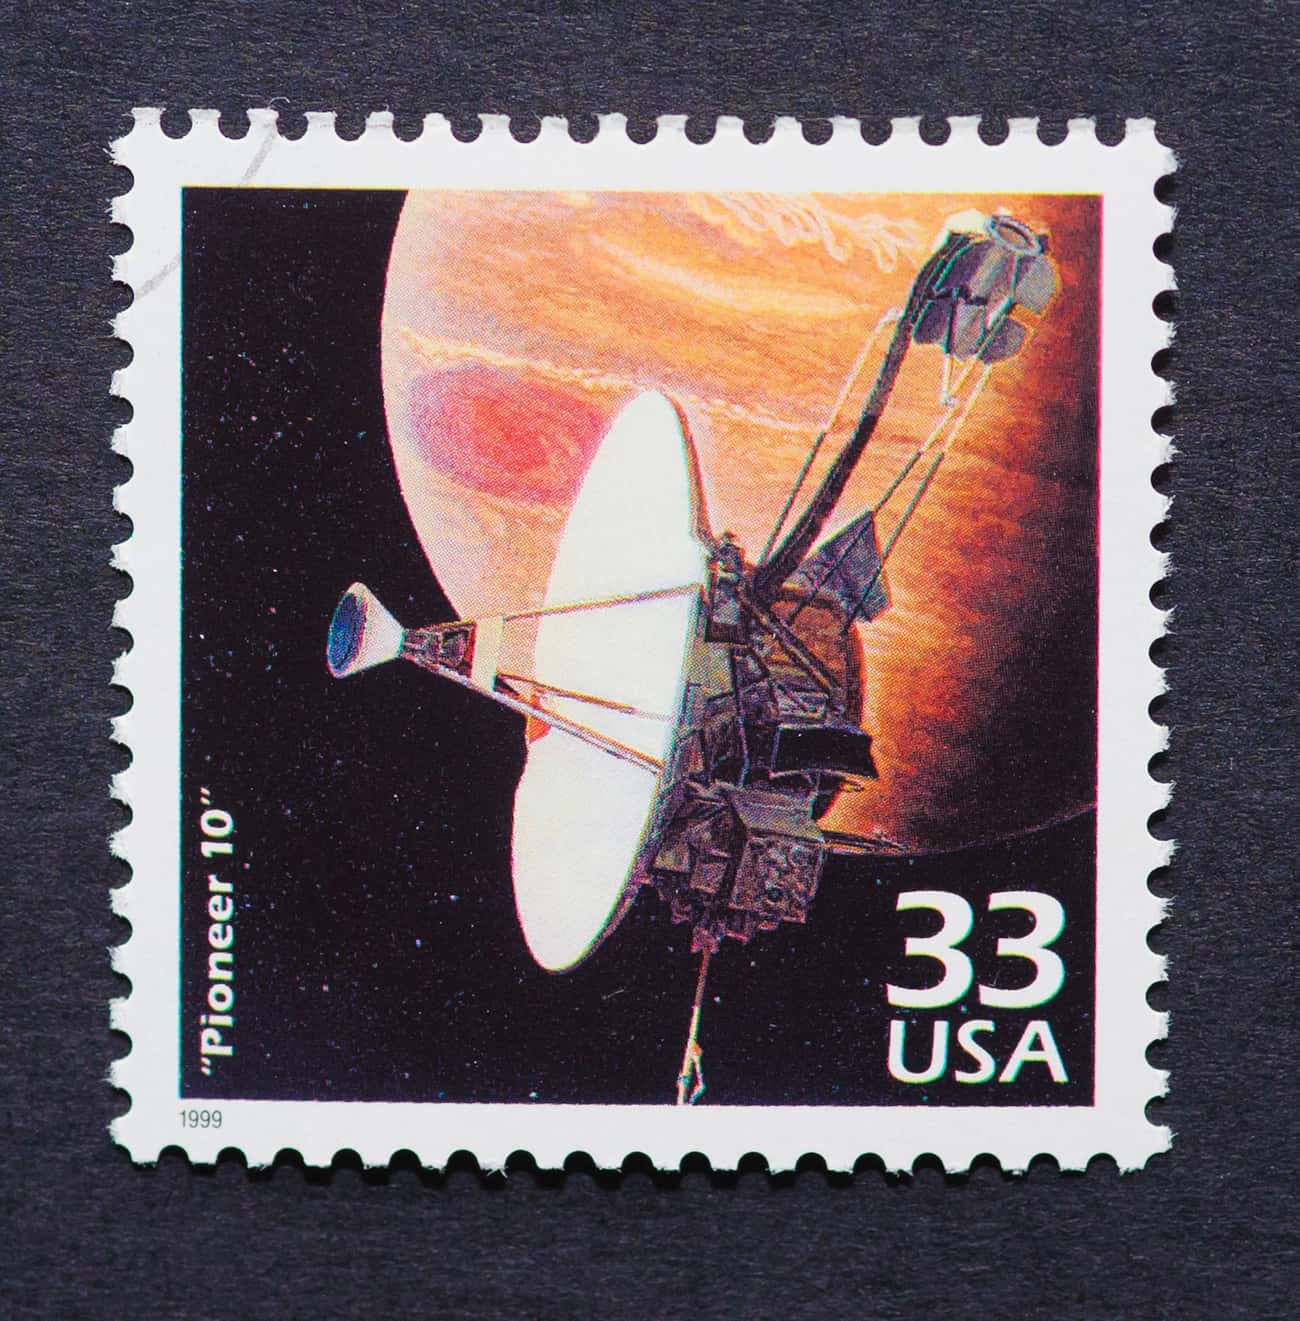 1972 - First Spacecraft to Leave the Solar System